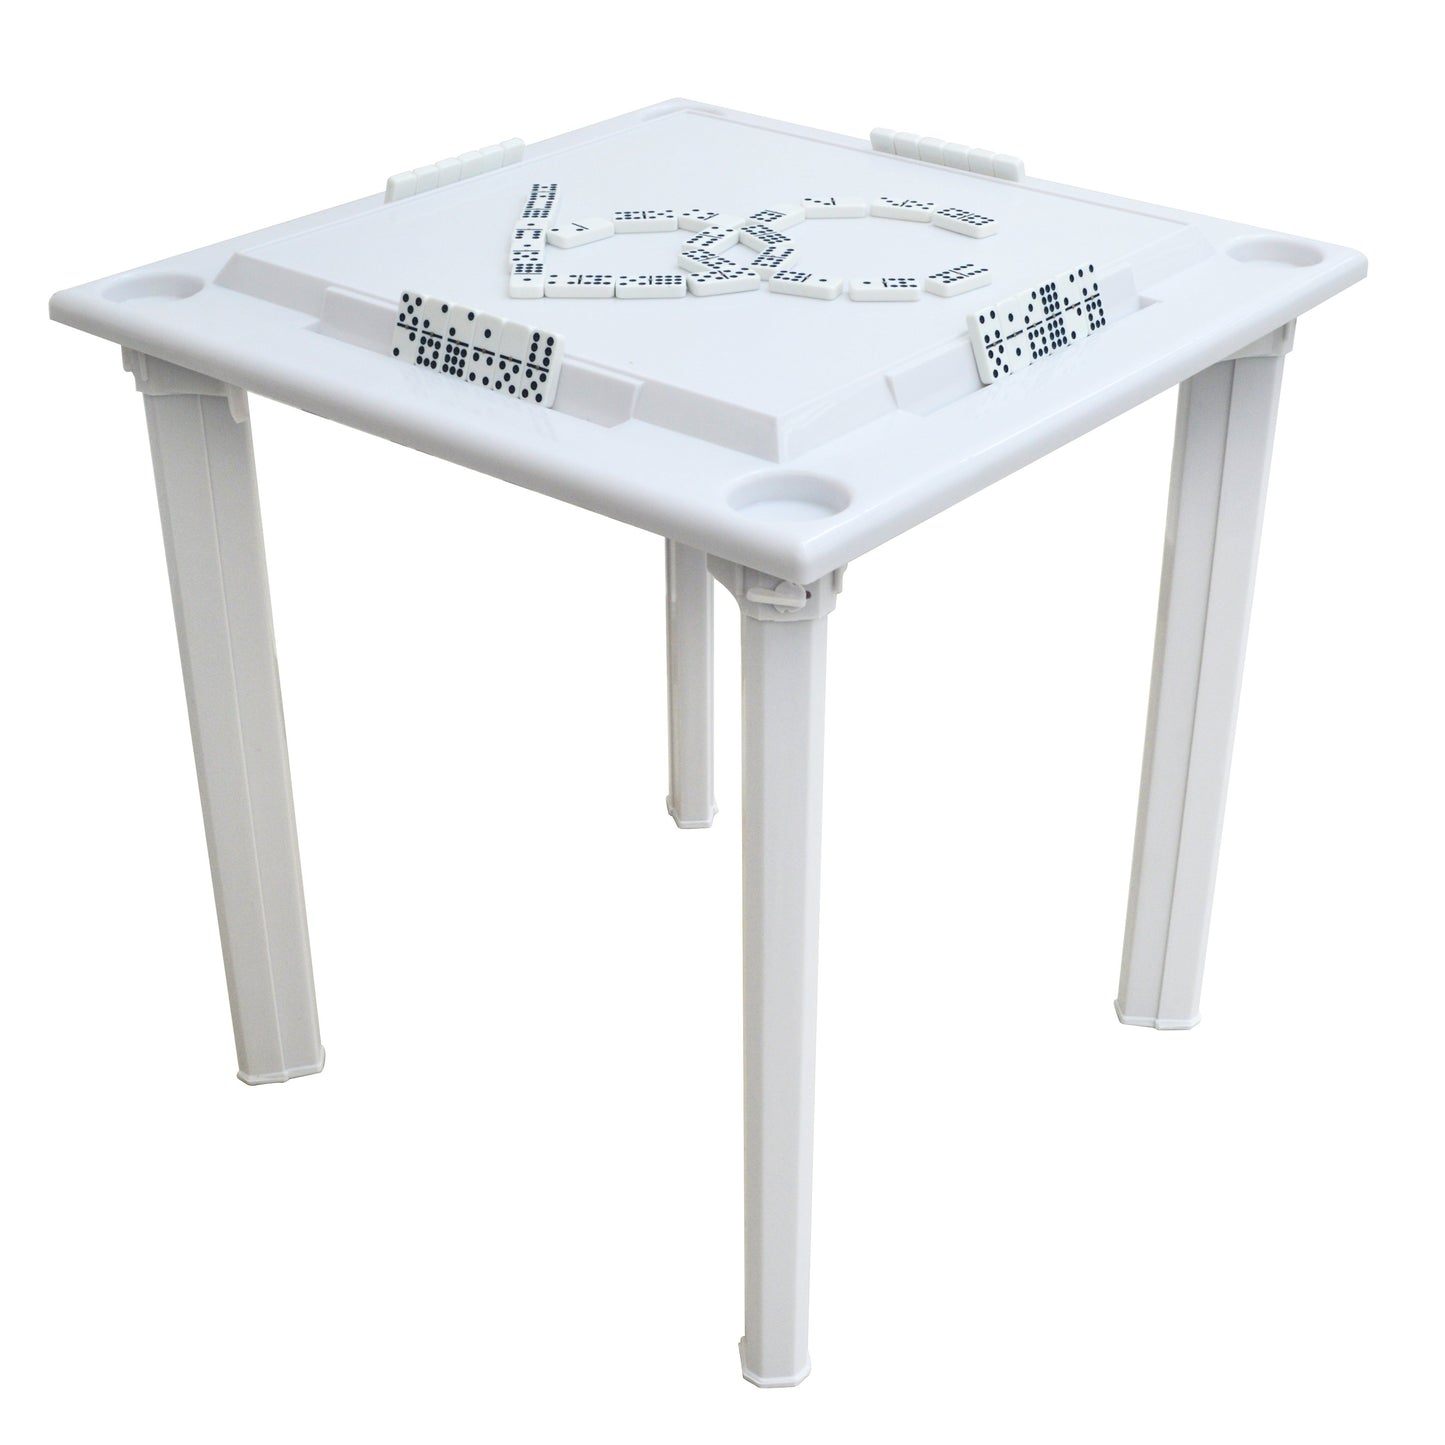 
                  
                    Bene Casa water proof plastic game table w/ tile rack, removable legs, White
                  
                